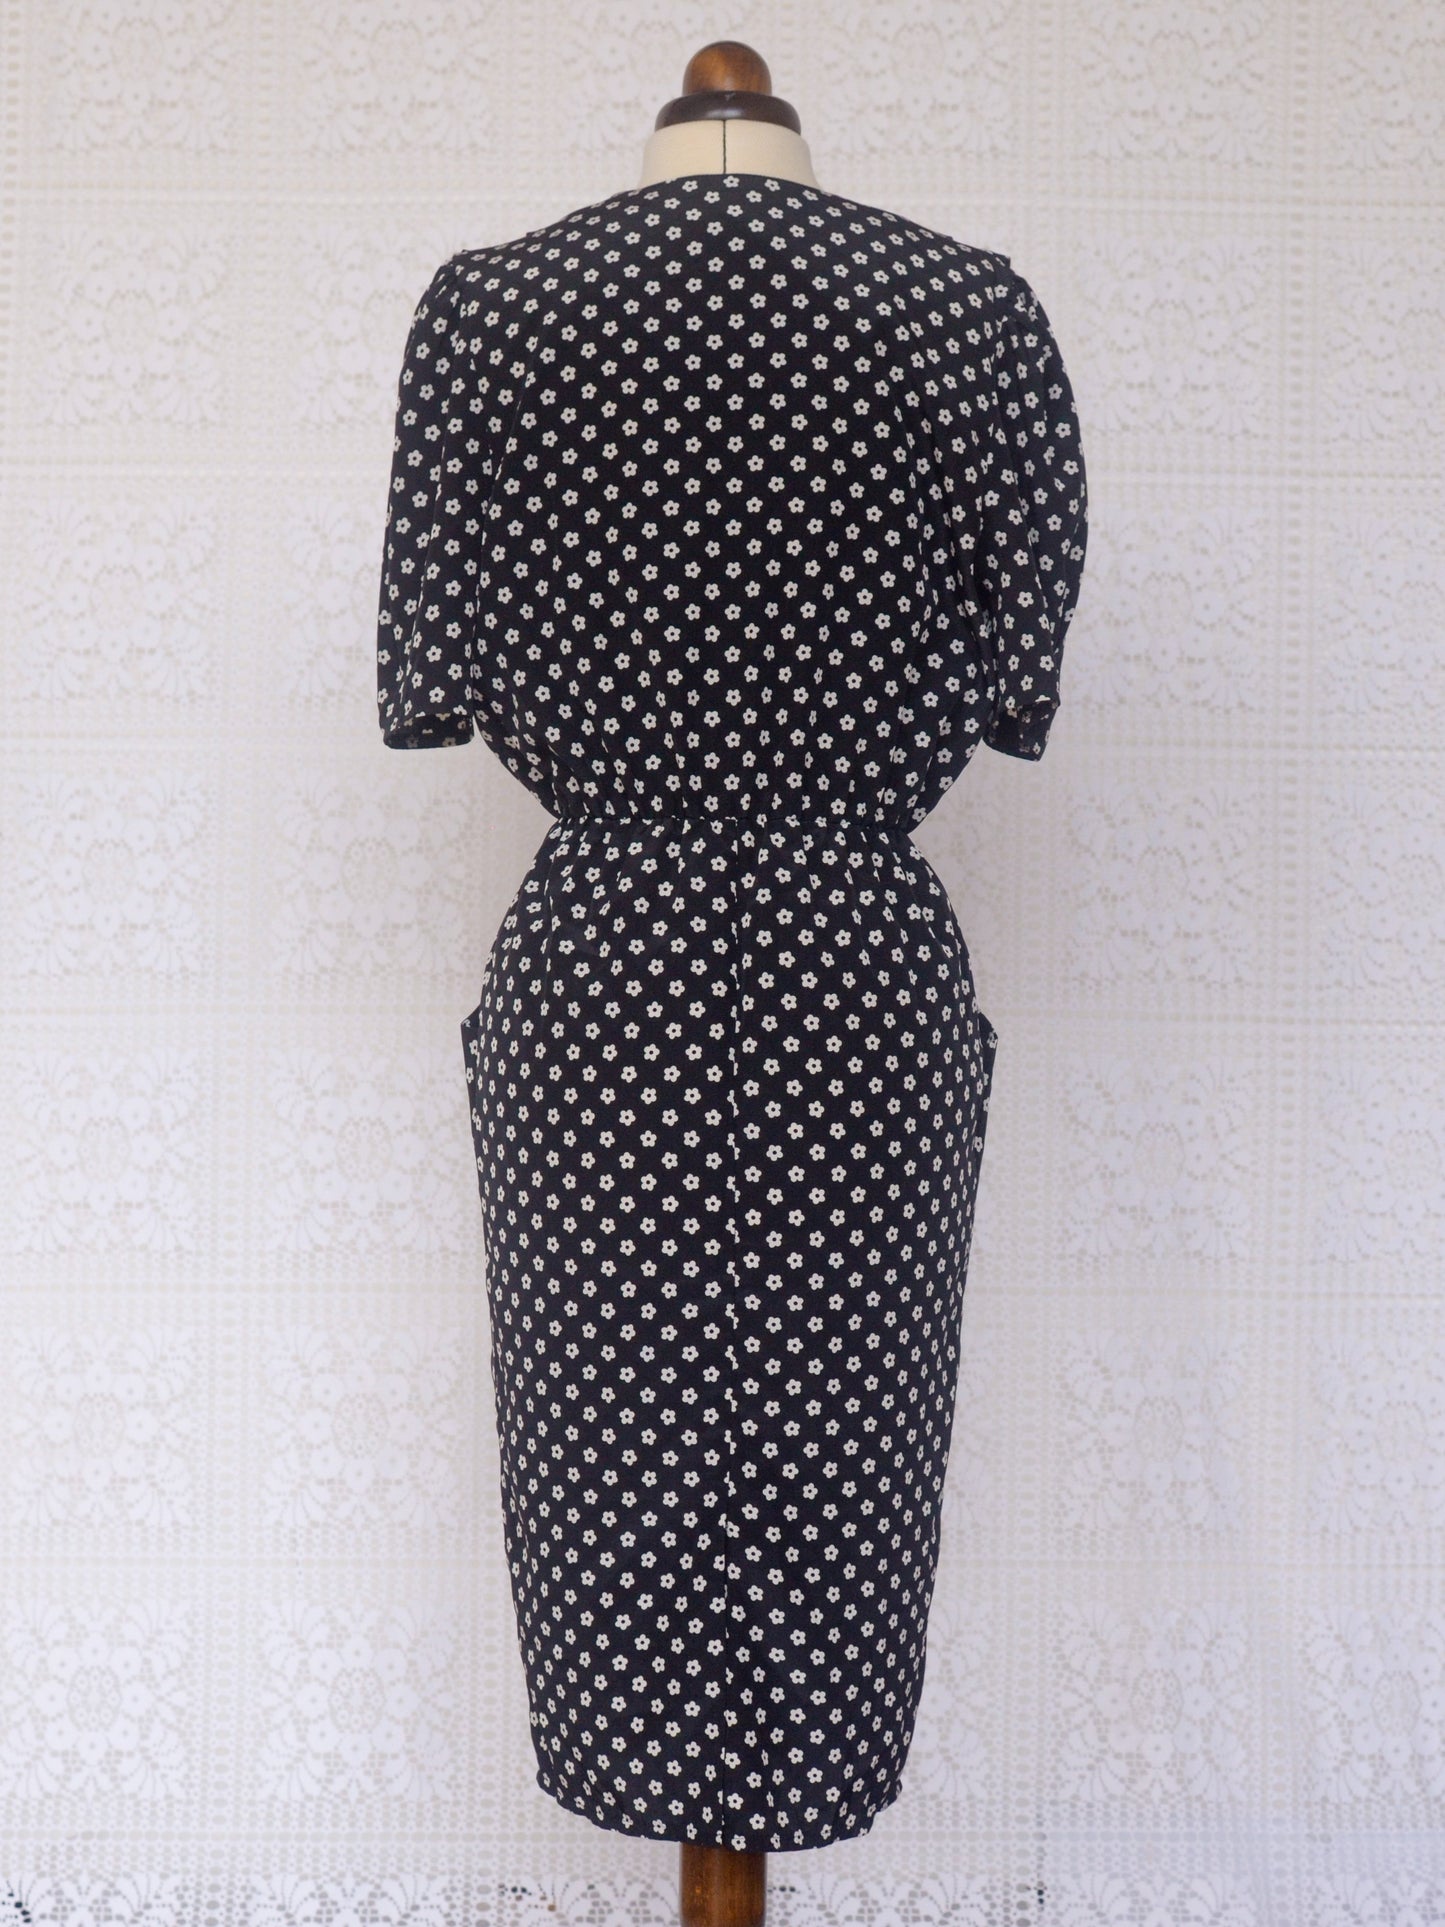 1980s C&A black and white daisy floral pattern pencil skirt dress